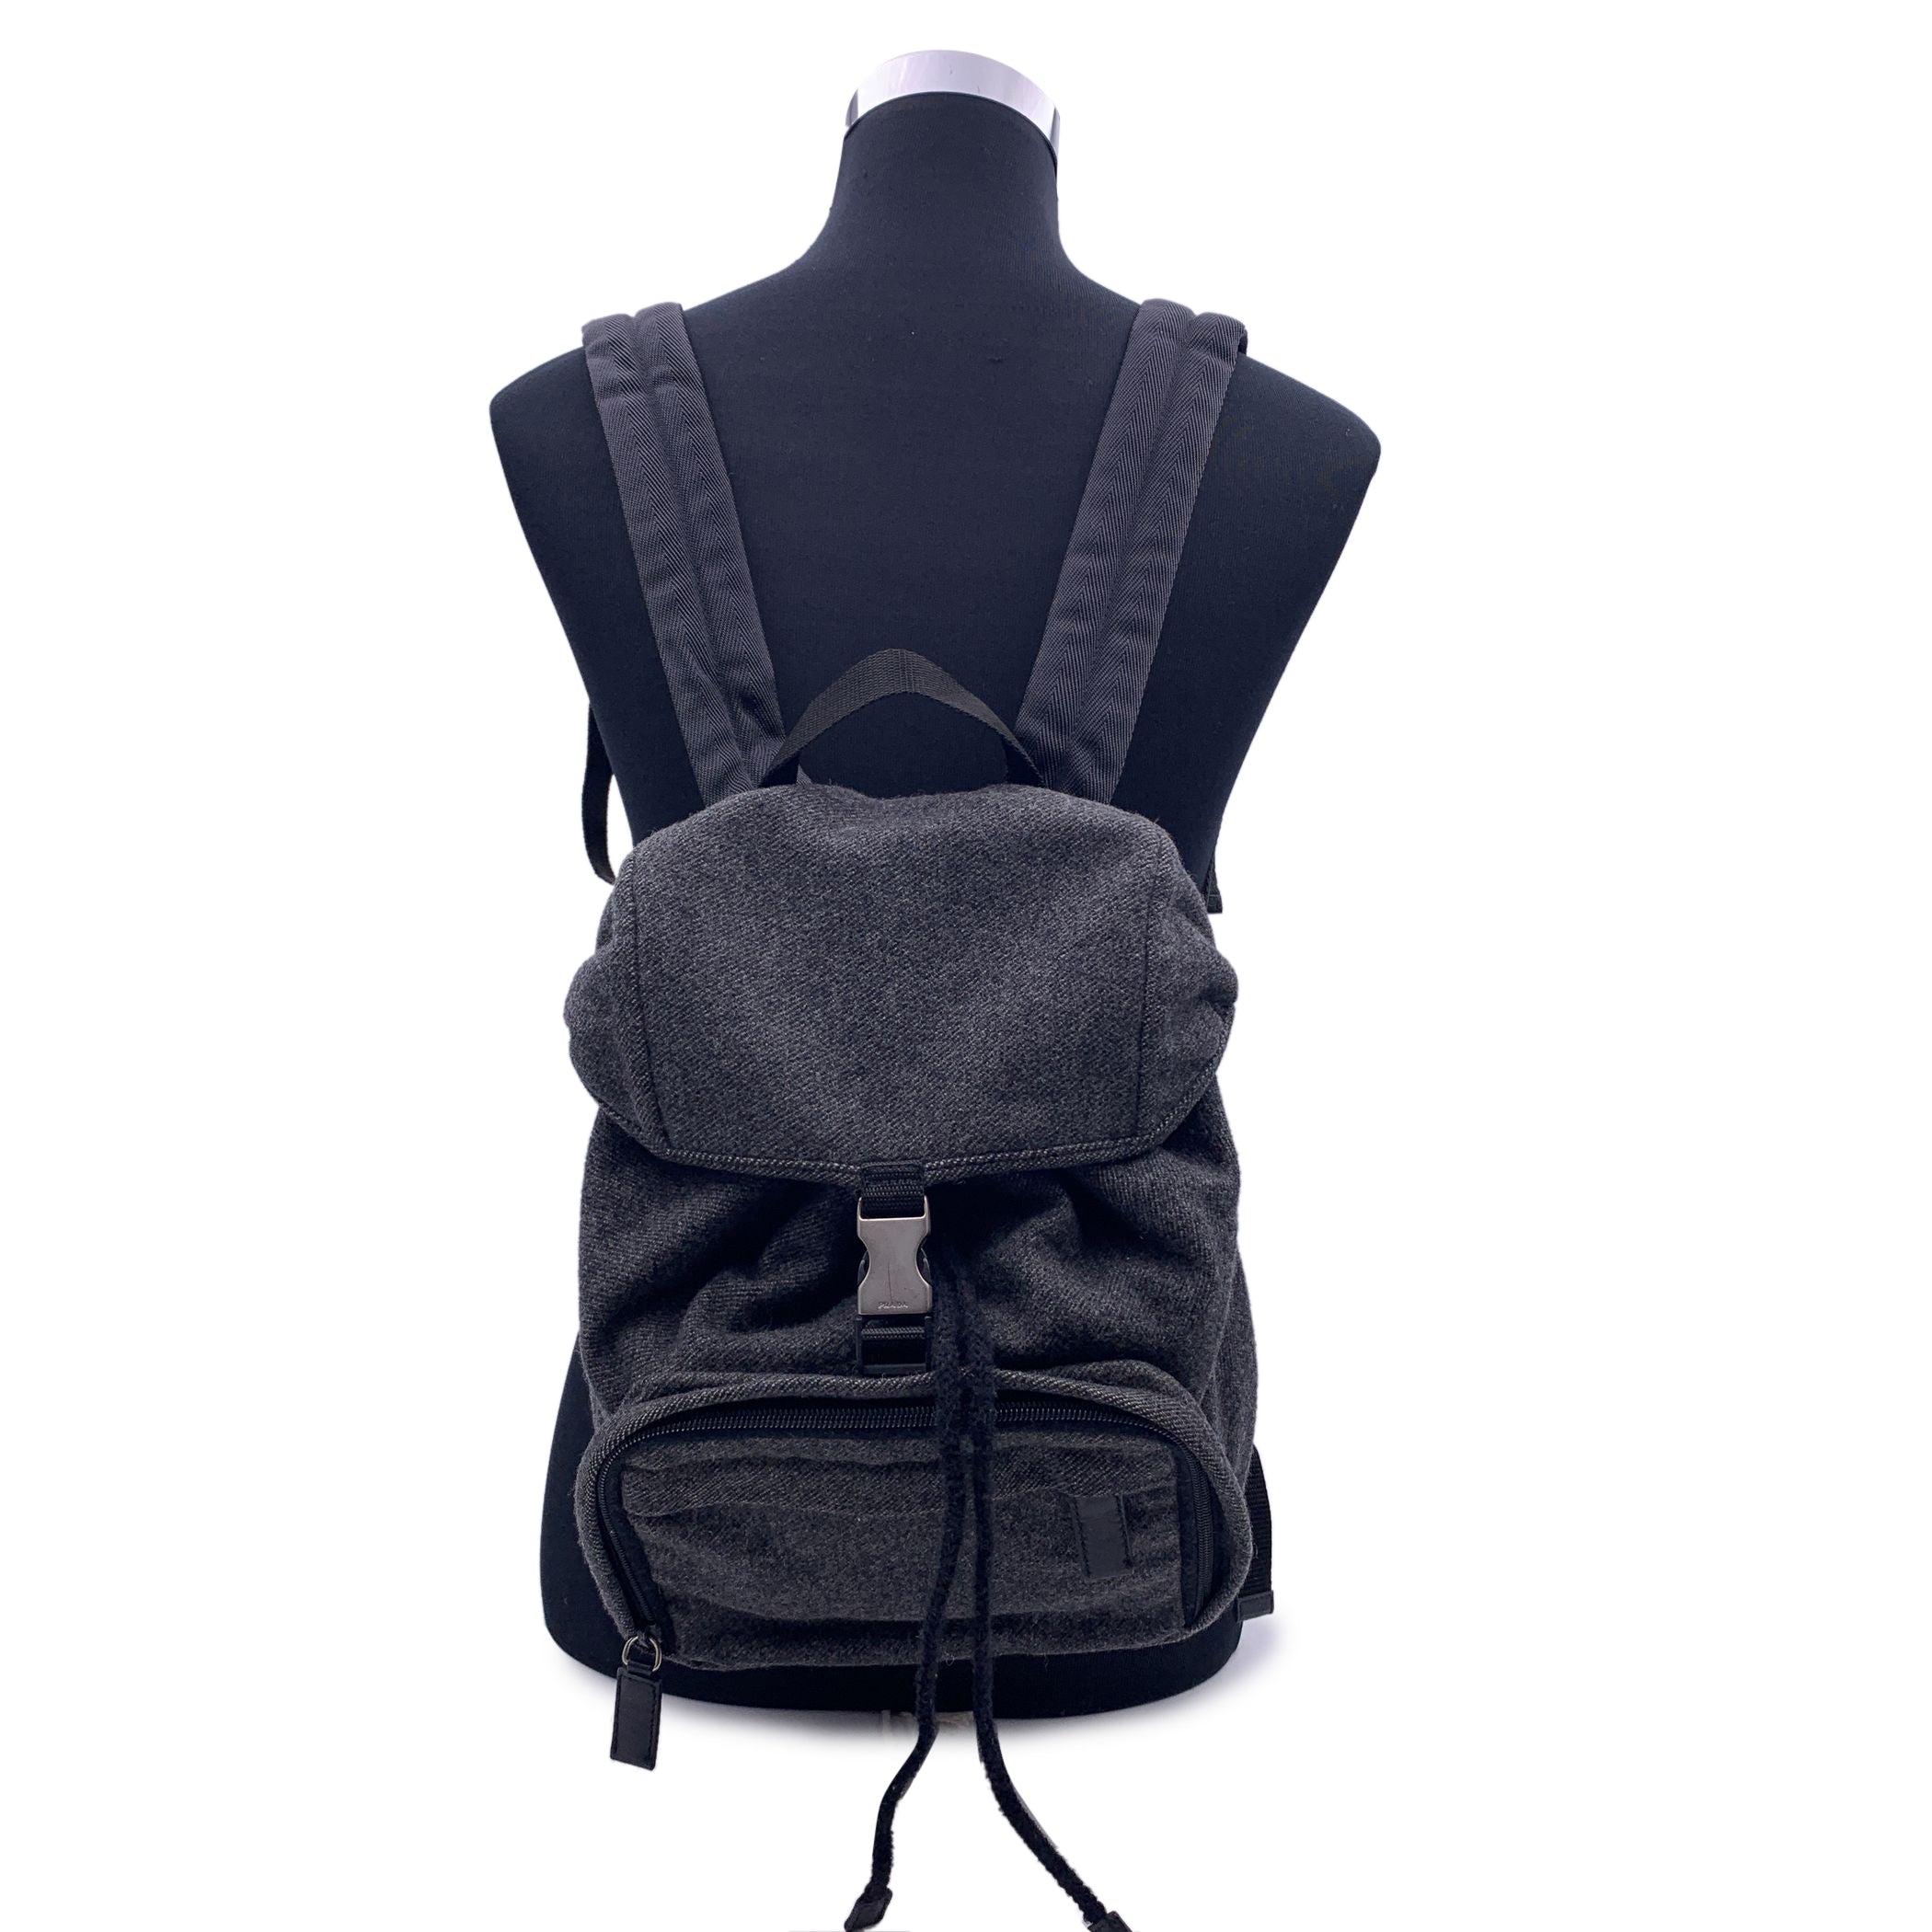 Vintage Prada grey wool Small Backpack Shoulder Bag. Front zip pocket. Front flap with single buckle closure. Drawstring on top opens to a black fabric lining. Adjustable straps. 'Prada' traingle logo on the back. 'PRADA Milano- Made in Italy' tag